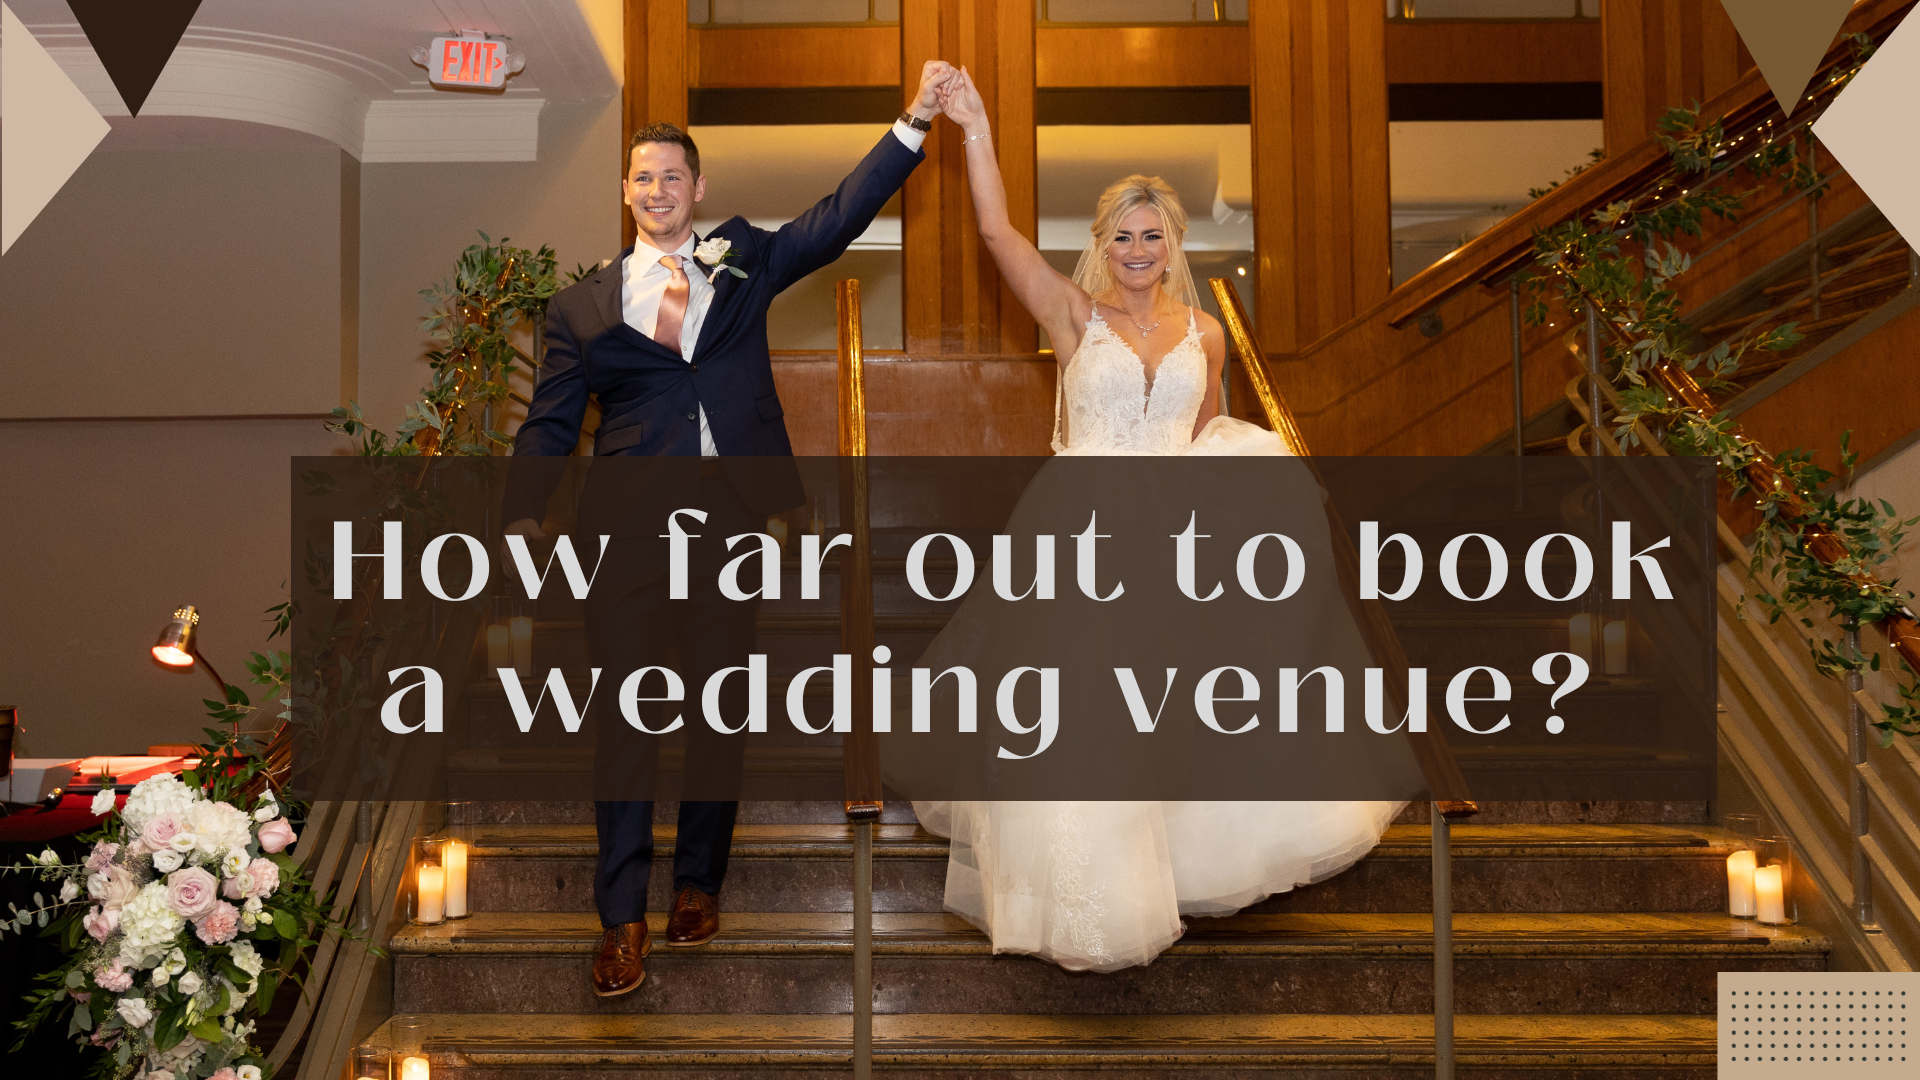 How far out to book a wedding venue